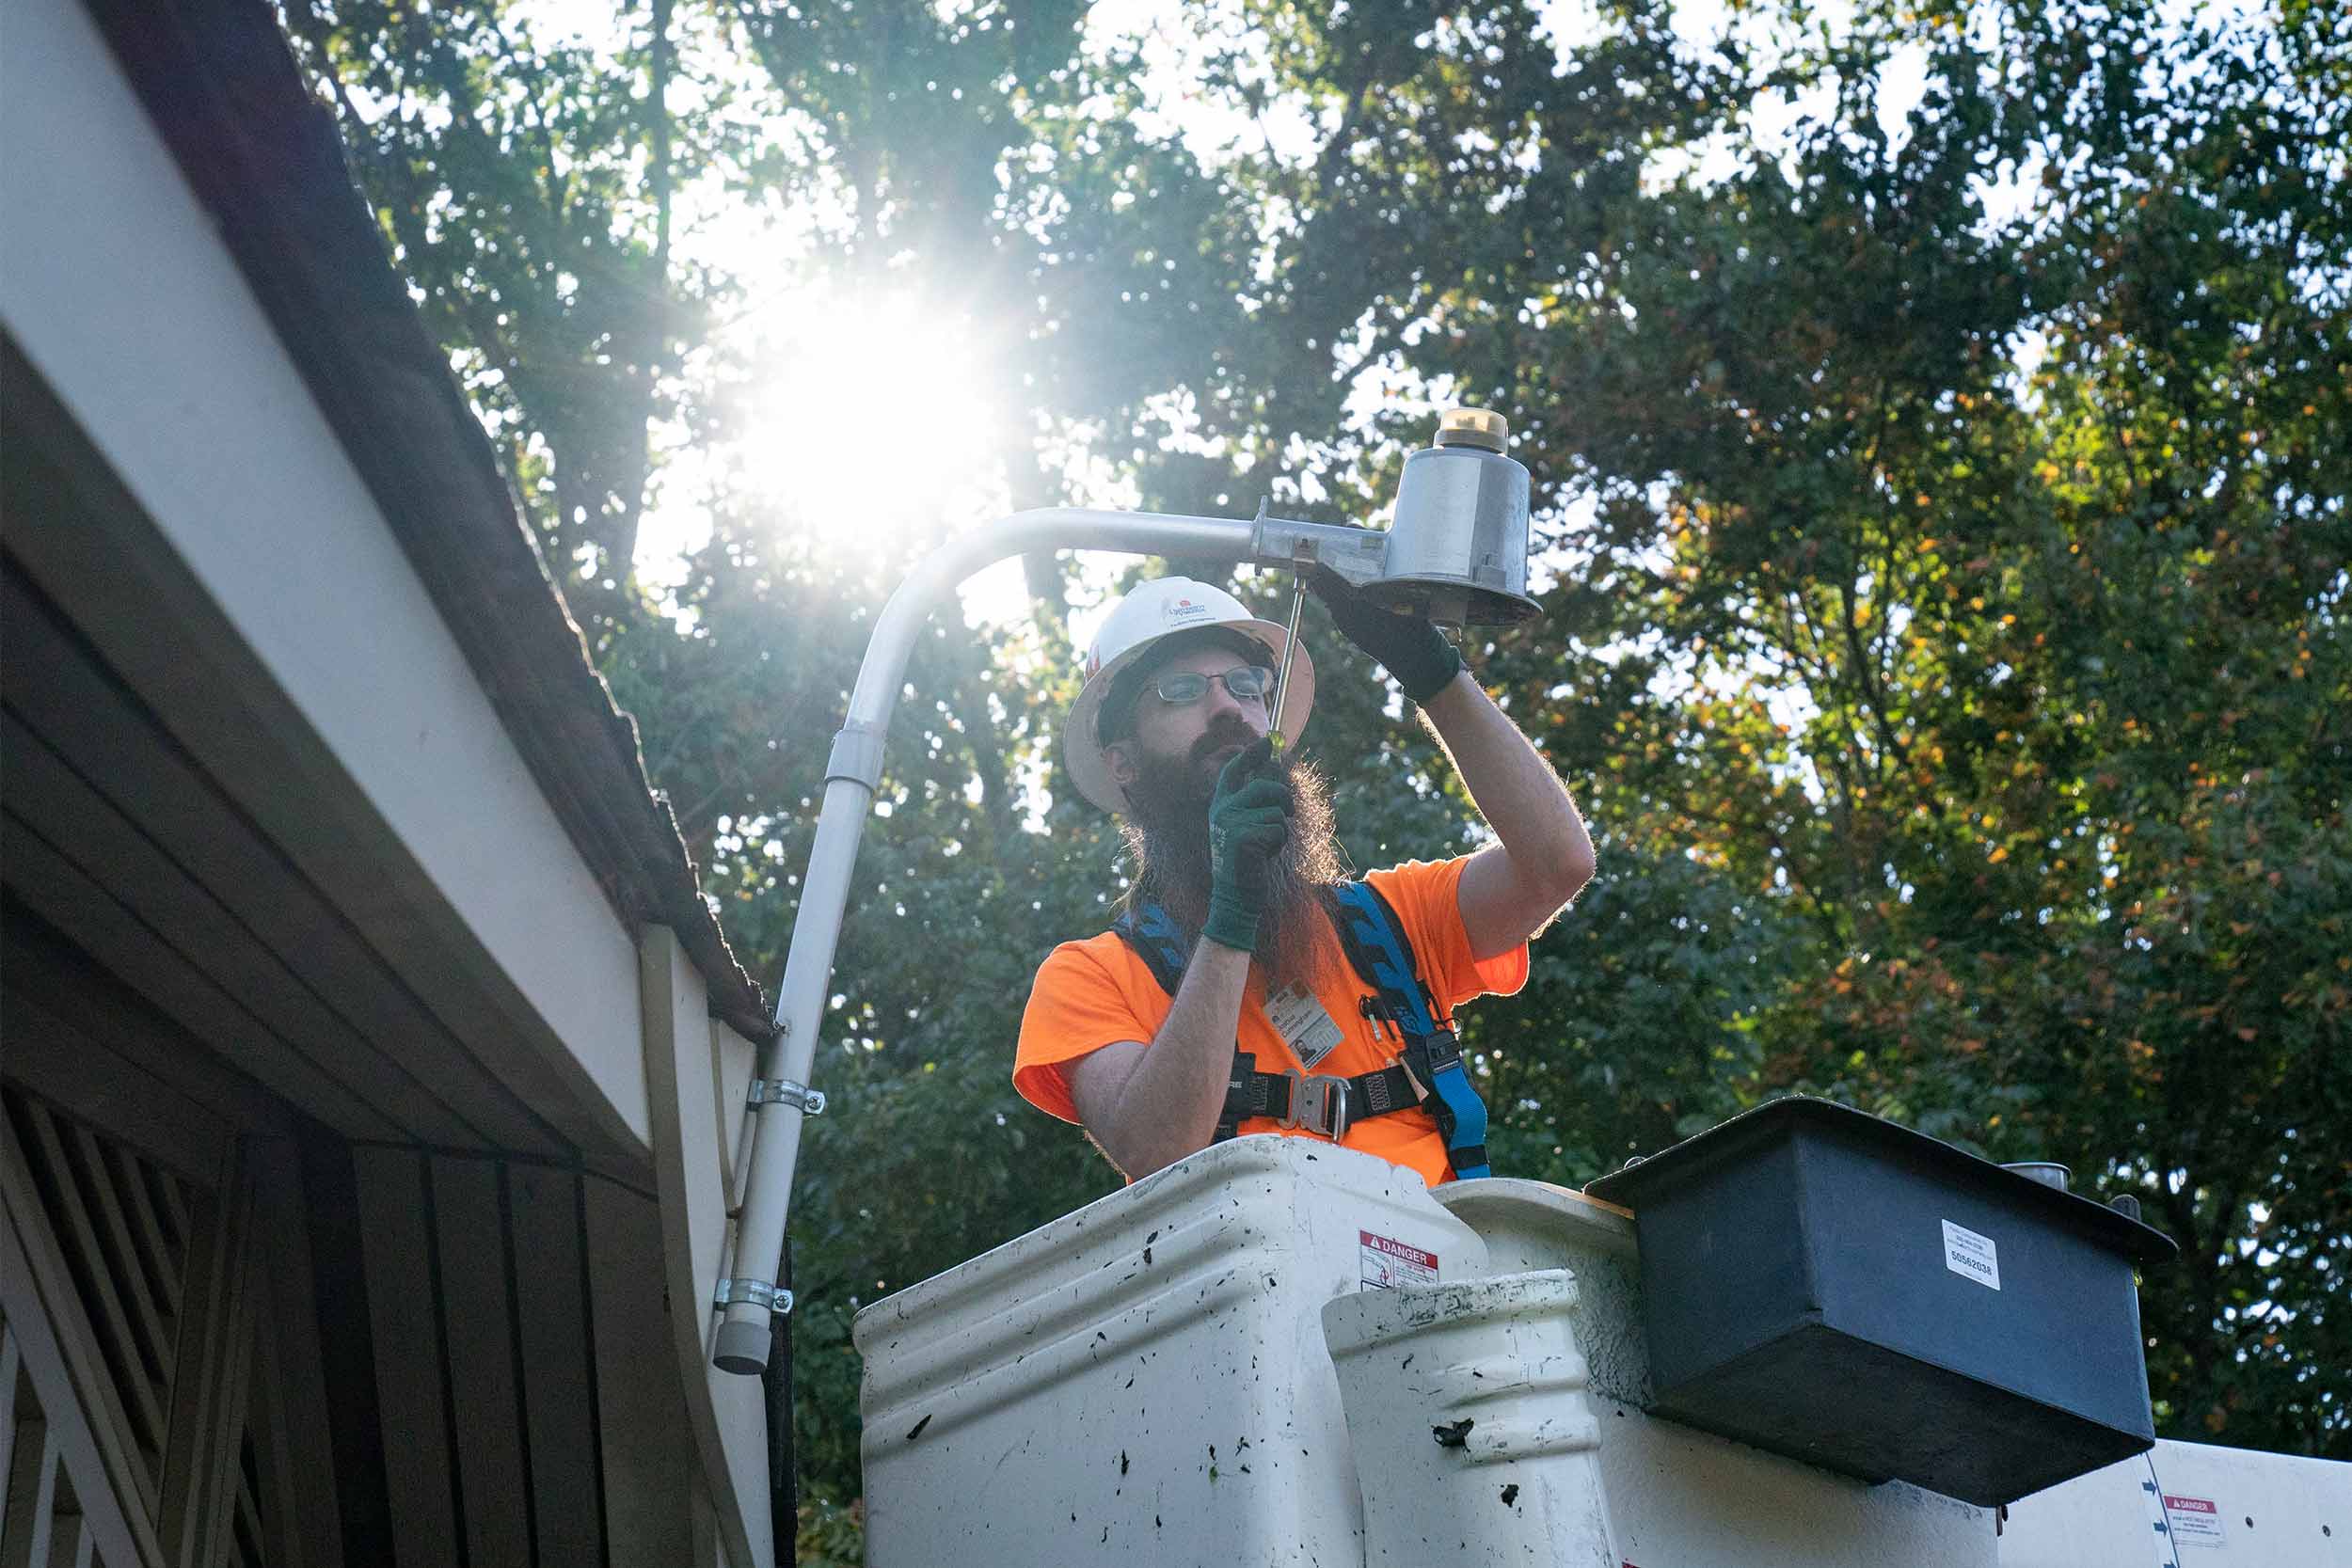 A man in a bucket lift uses tools to fix an exterior light.